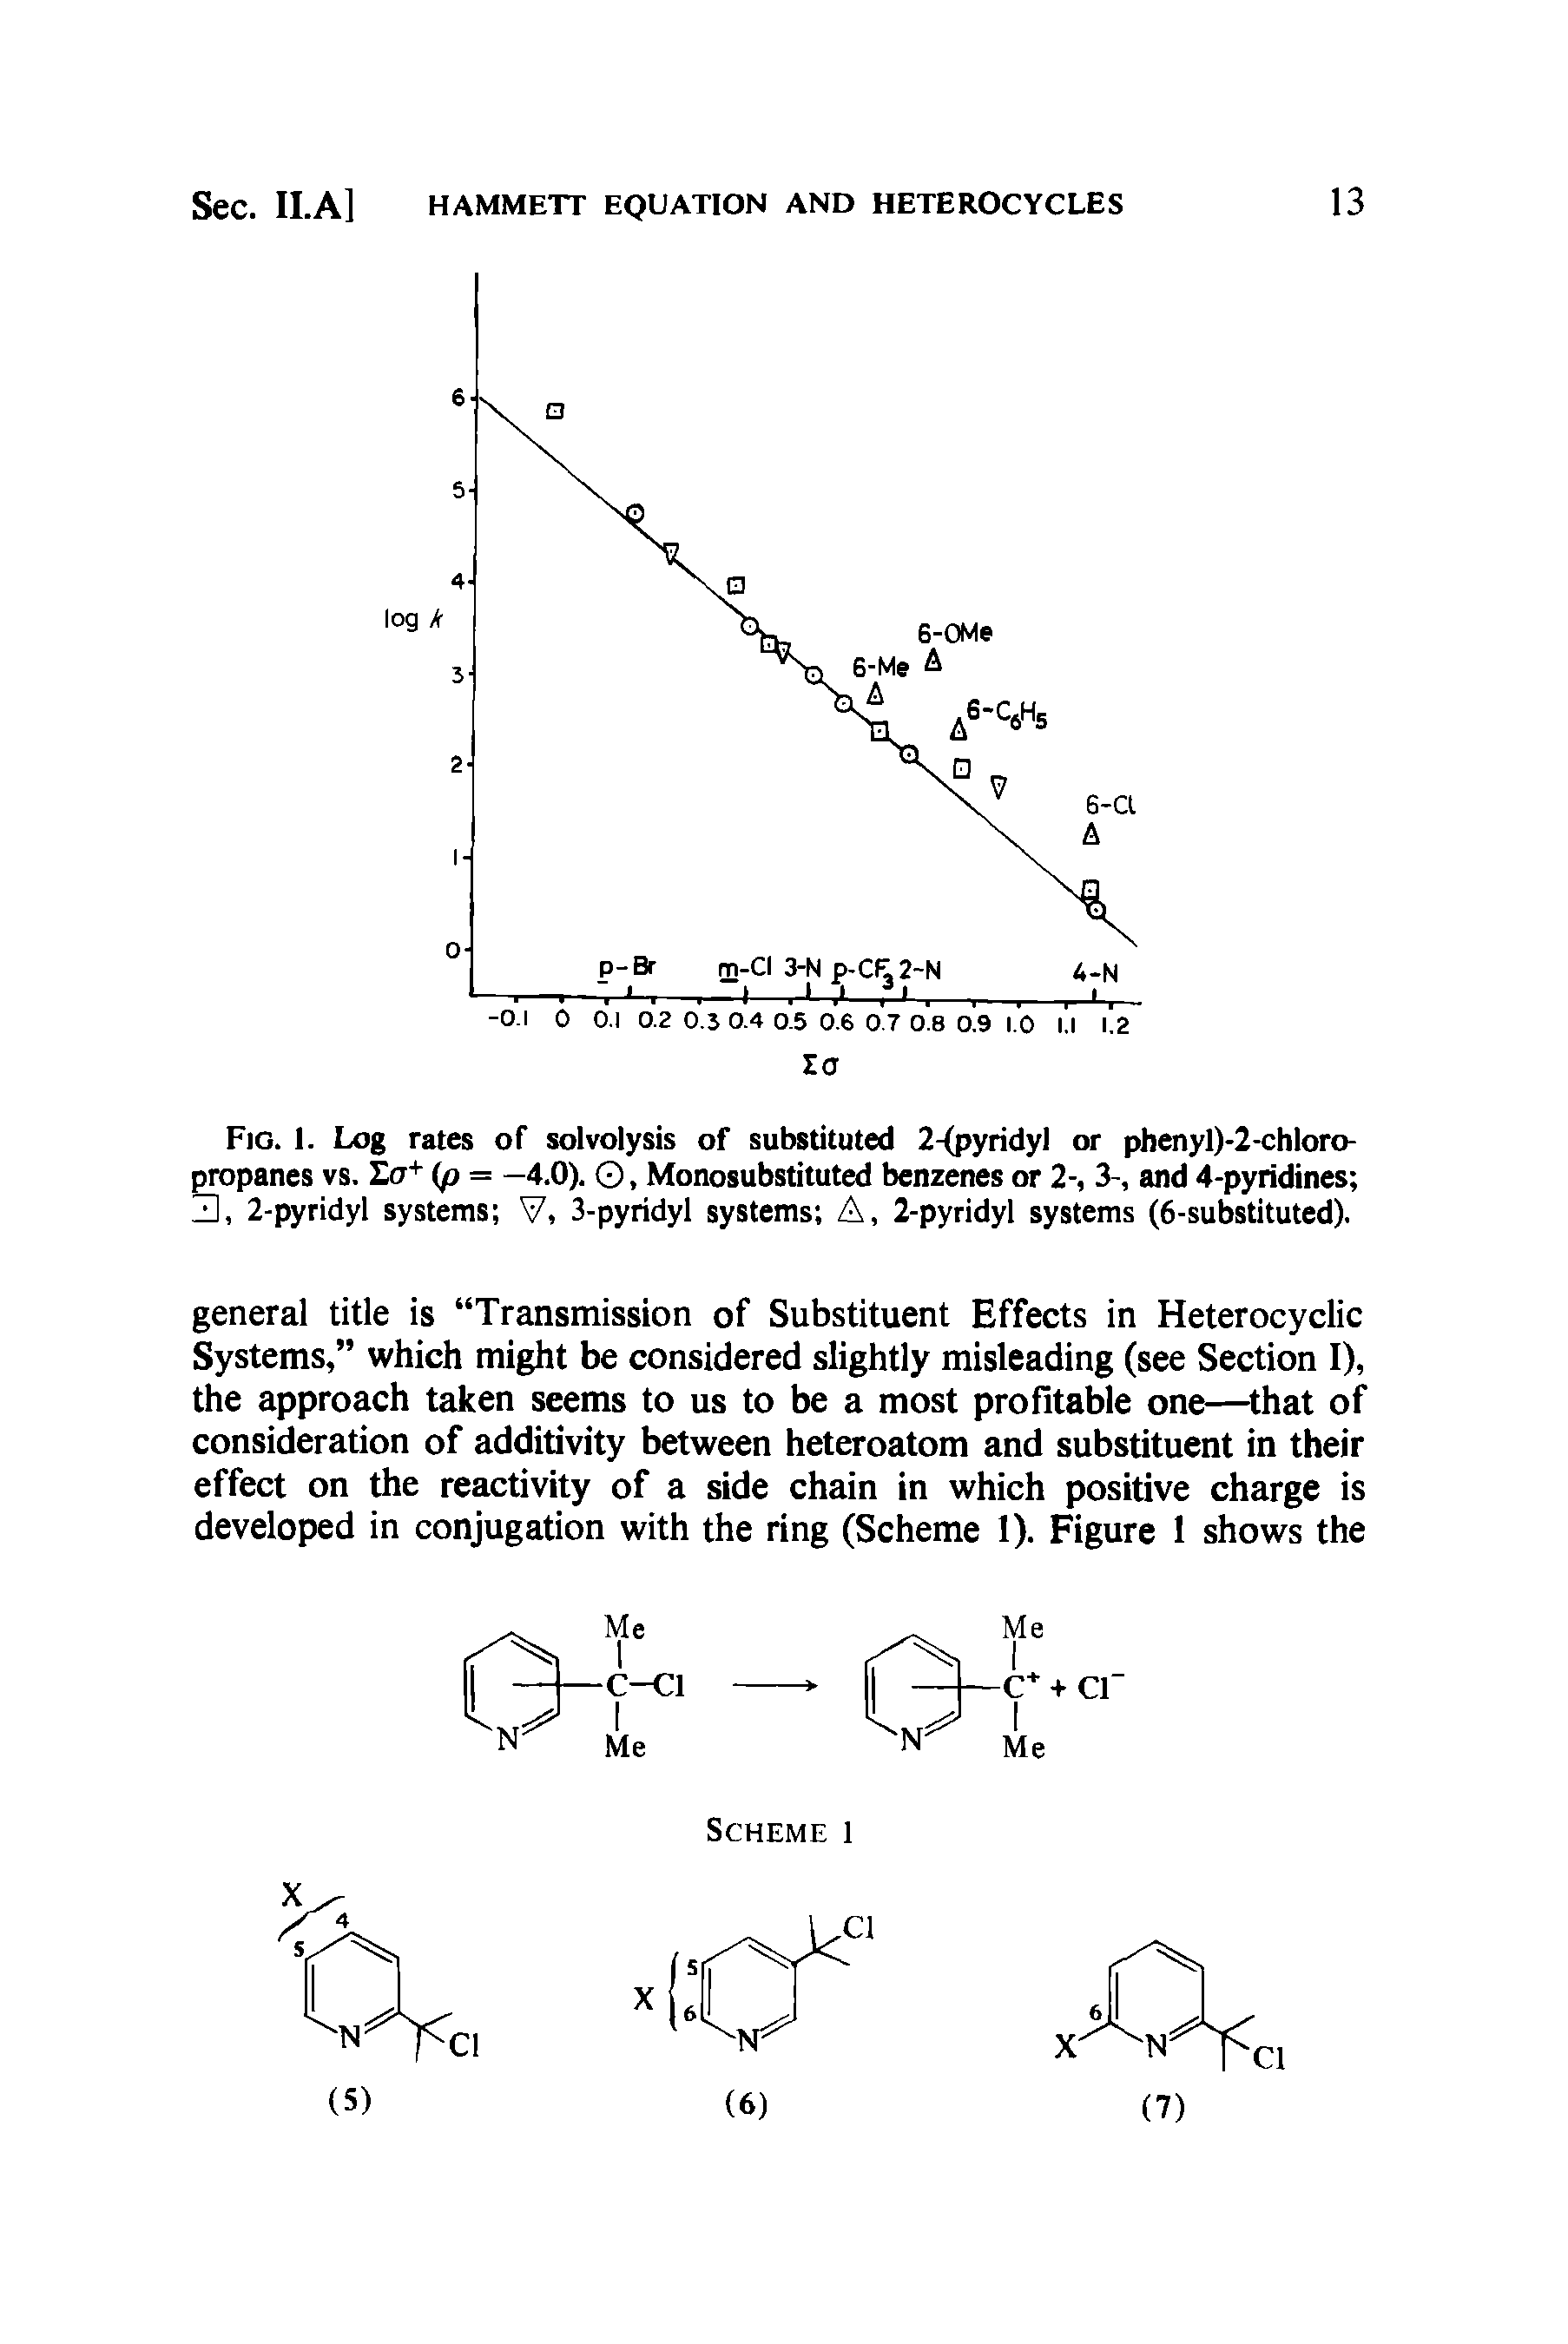 Fig. 1. Log rates of solvolysis of substituted 2-(pyridyl or phenyl)-2-chloro-propanes vs. La+ (p = —4.0). O, Monosubstituted benzenes or 2-, 3-, and 4-pyridines 3, 2-pyridyl systems V, 3-pyridyl systems A, 2-pyridyl systems (6-substituted).